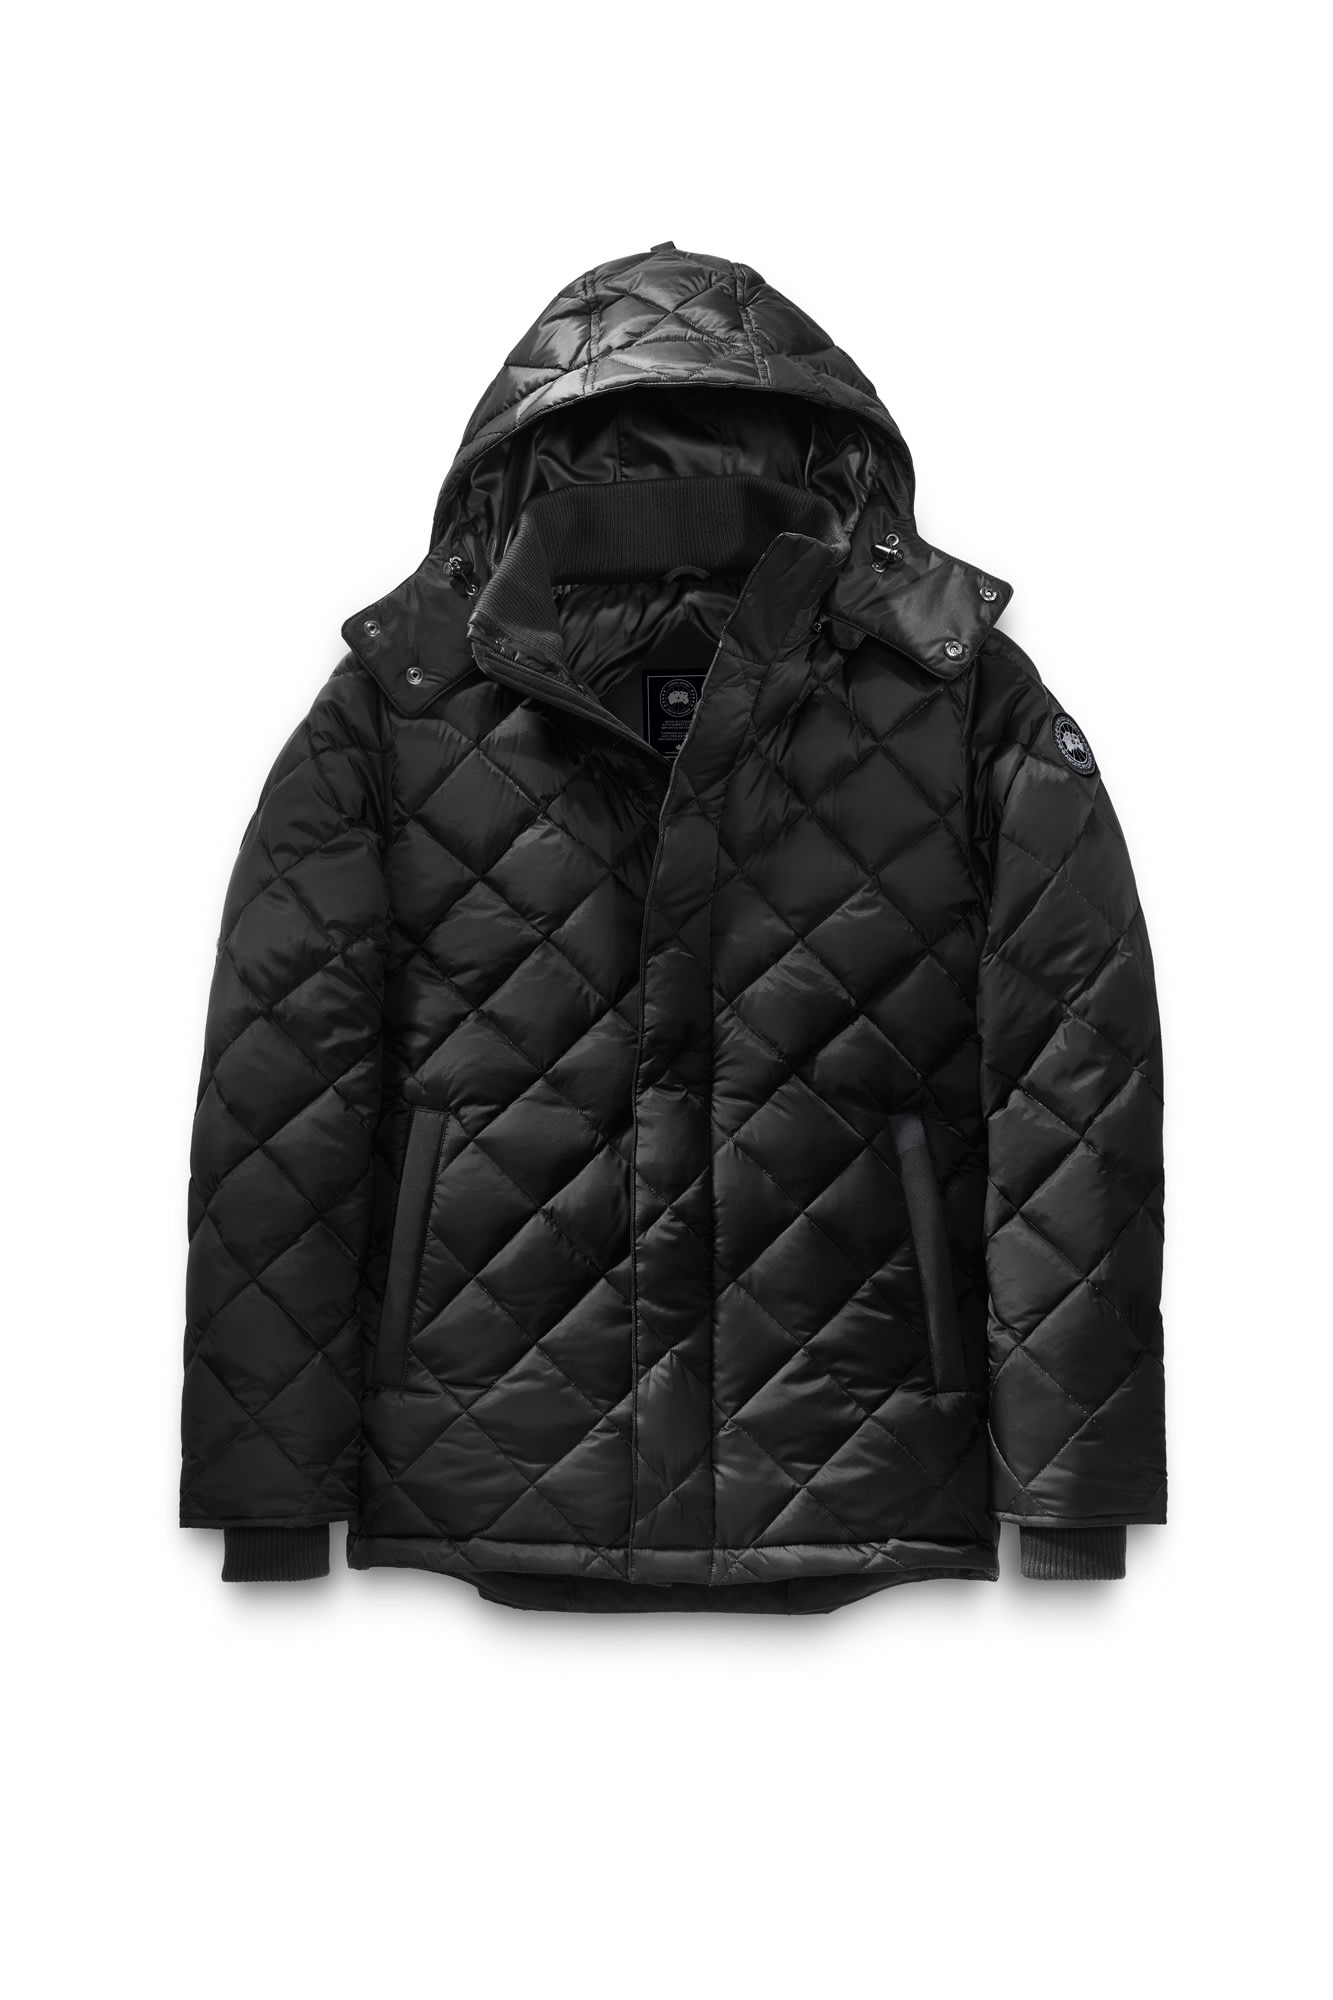 frostguard insulated jacket